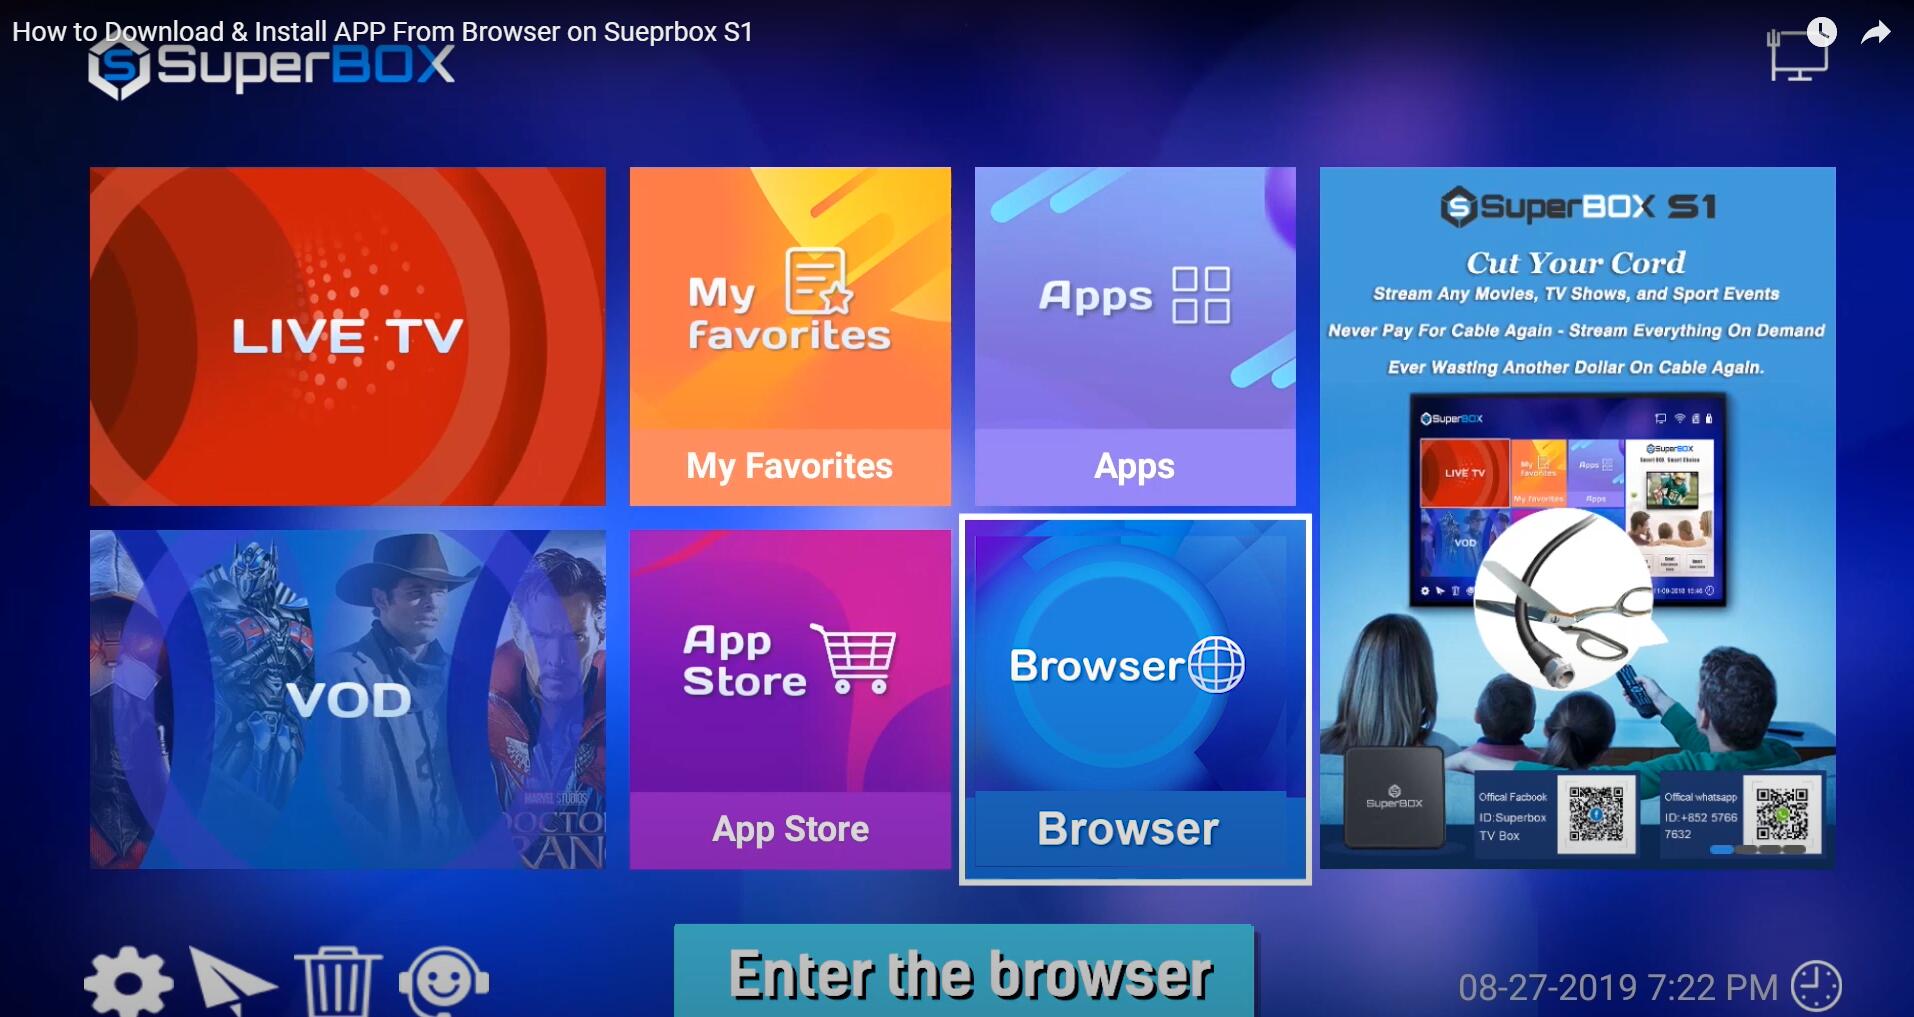 How to Download & Install APP From Browser on Sueprbox S1?